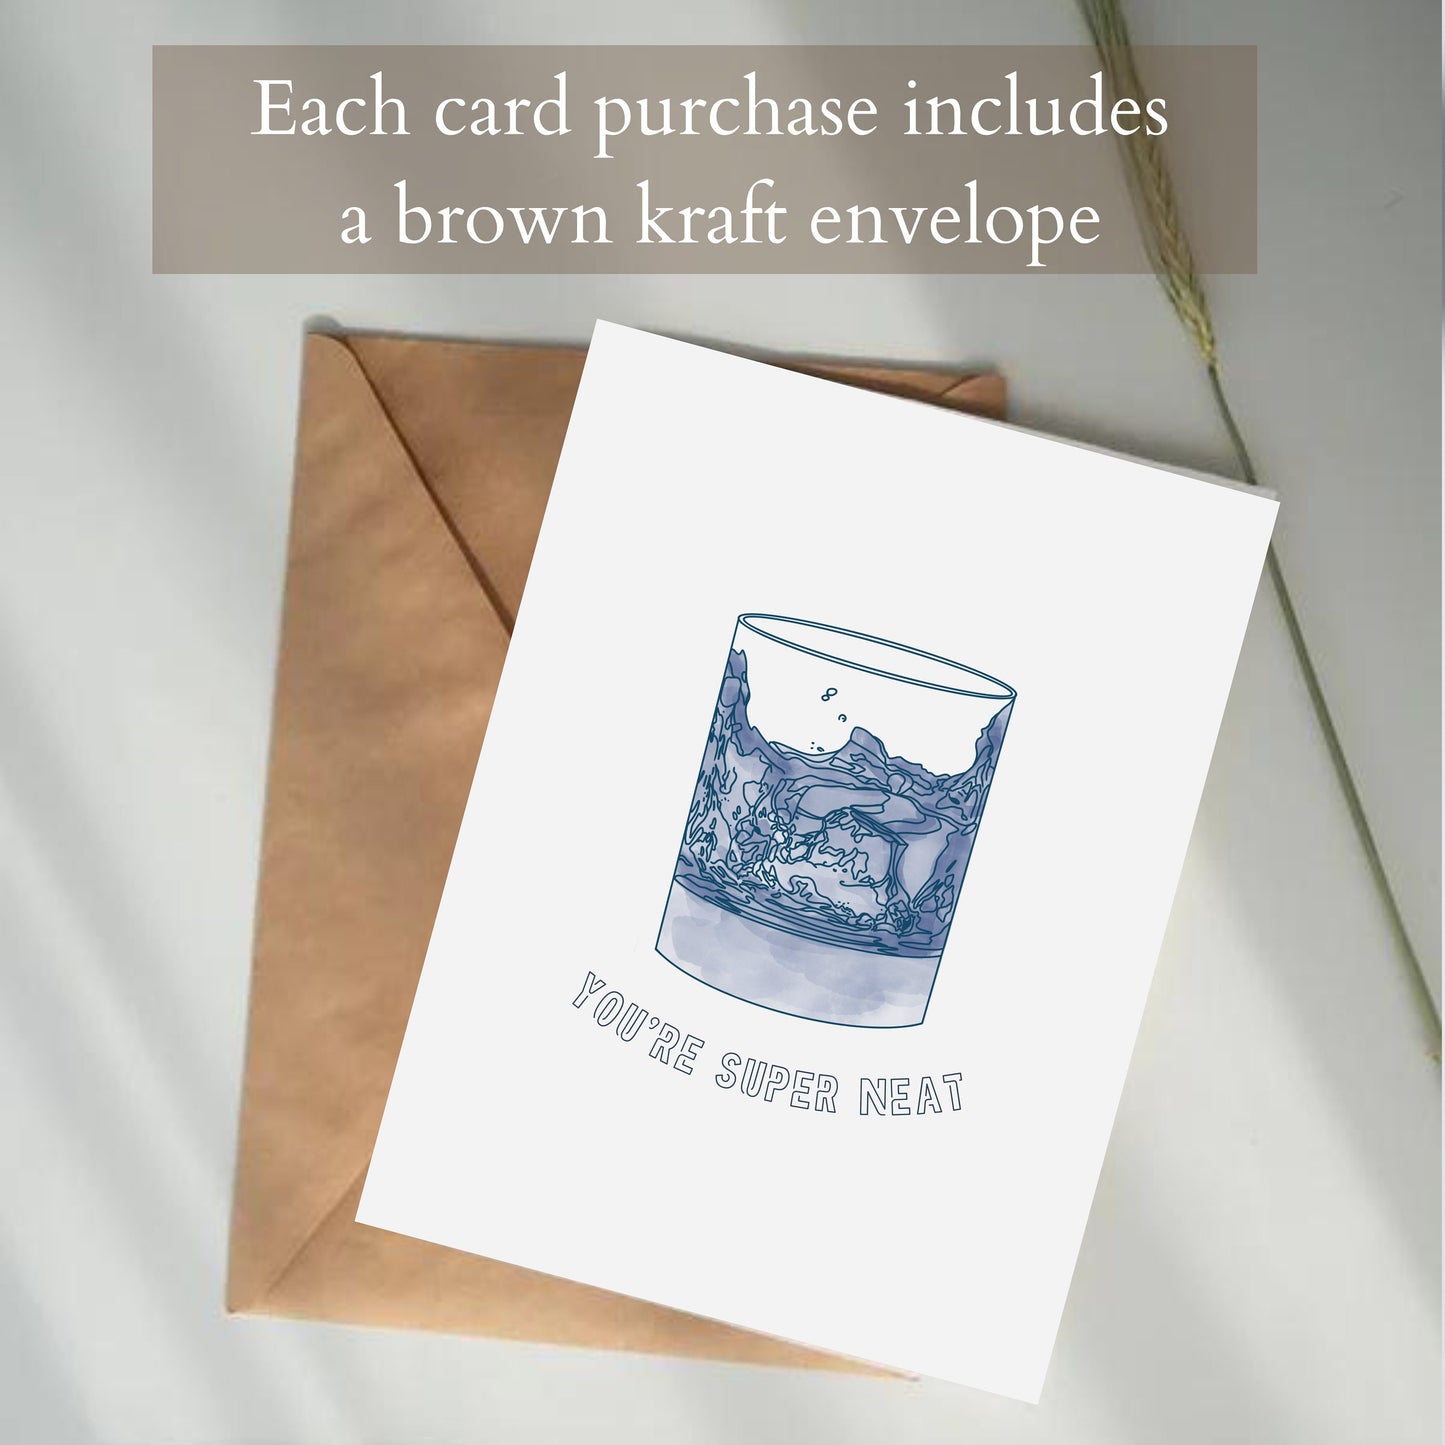 greeting card comes with a brown kraft envelope